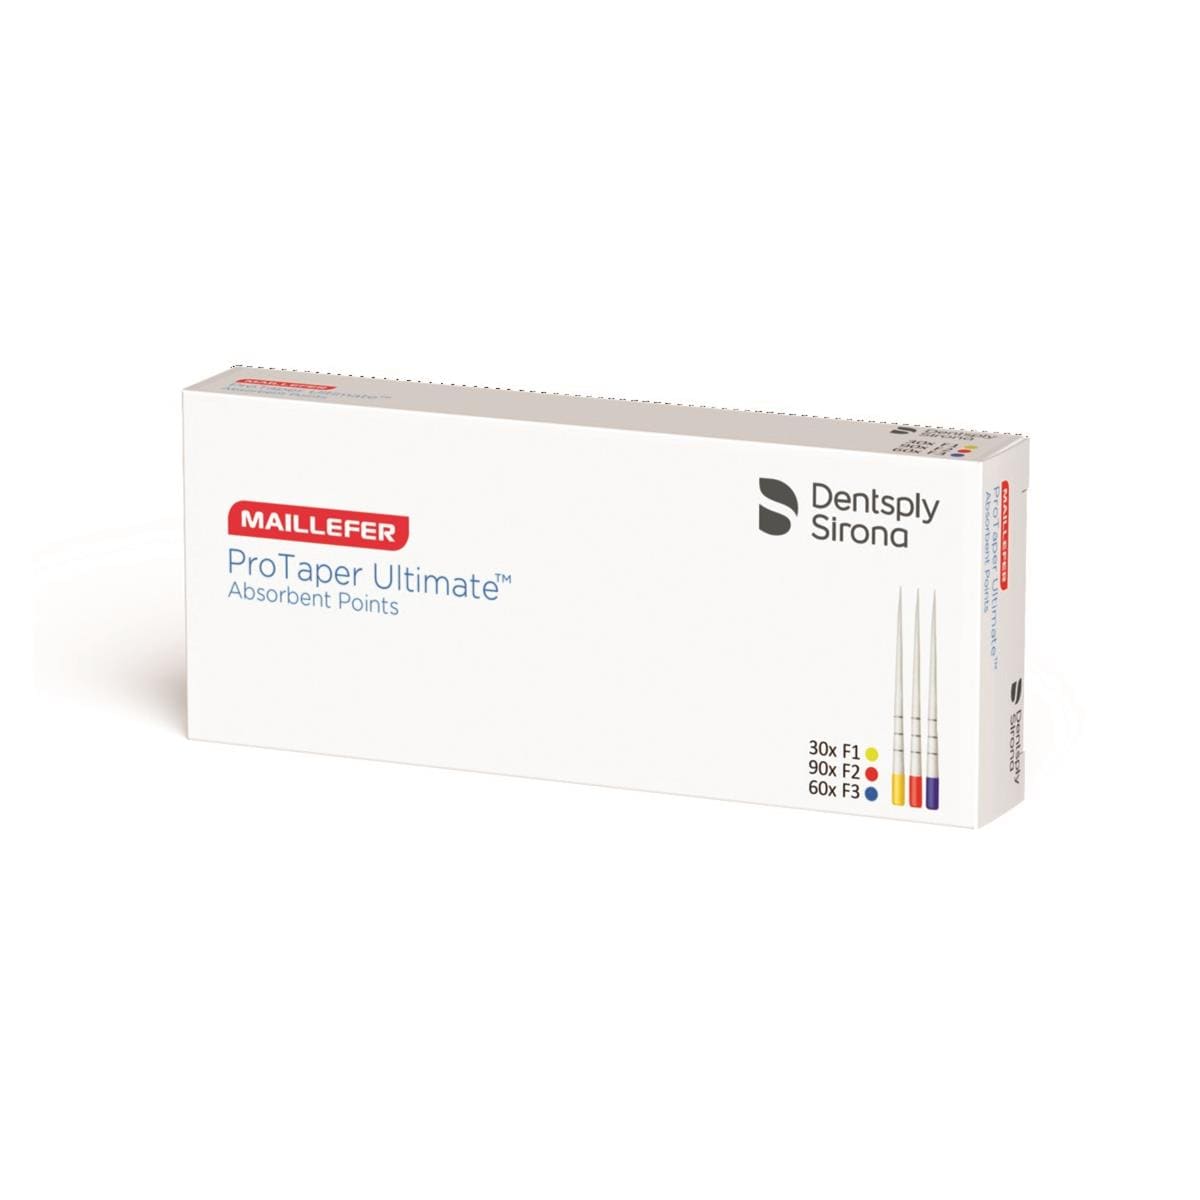 ProTaper Ultimate Absorbent Point F3 (bote de 180) Dentsply Sirona